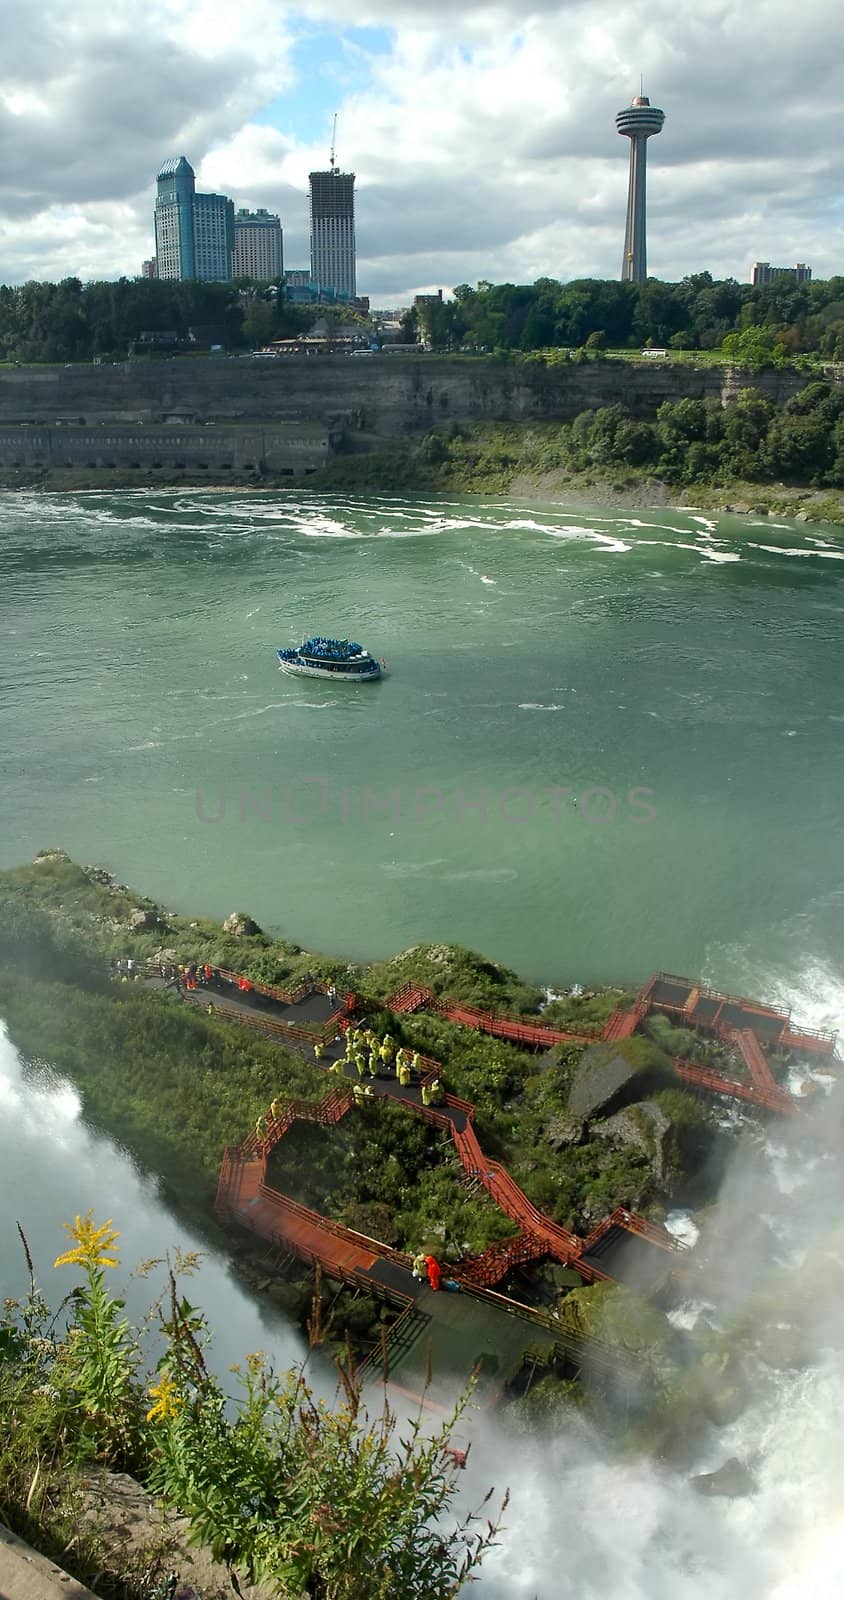 niagara falls, skylon tower and a boat, photo taken from american side